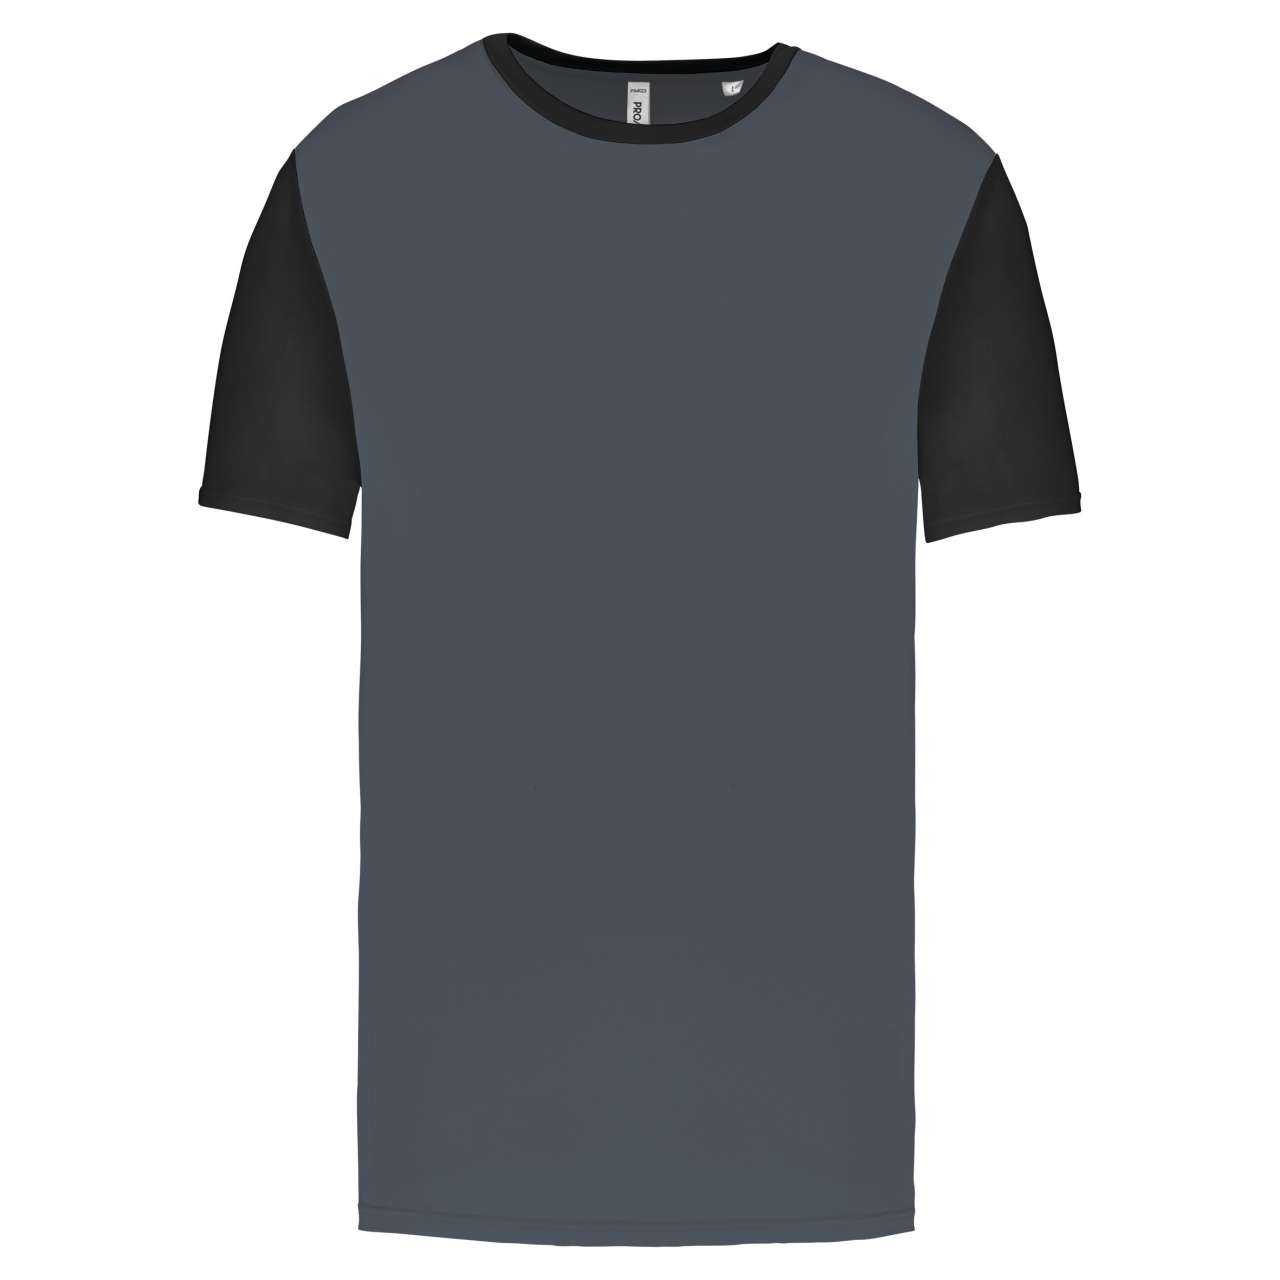 Promo  ADULTS' BICOLOUR SHORT-SLEEVED T-SHIRT